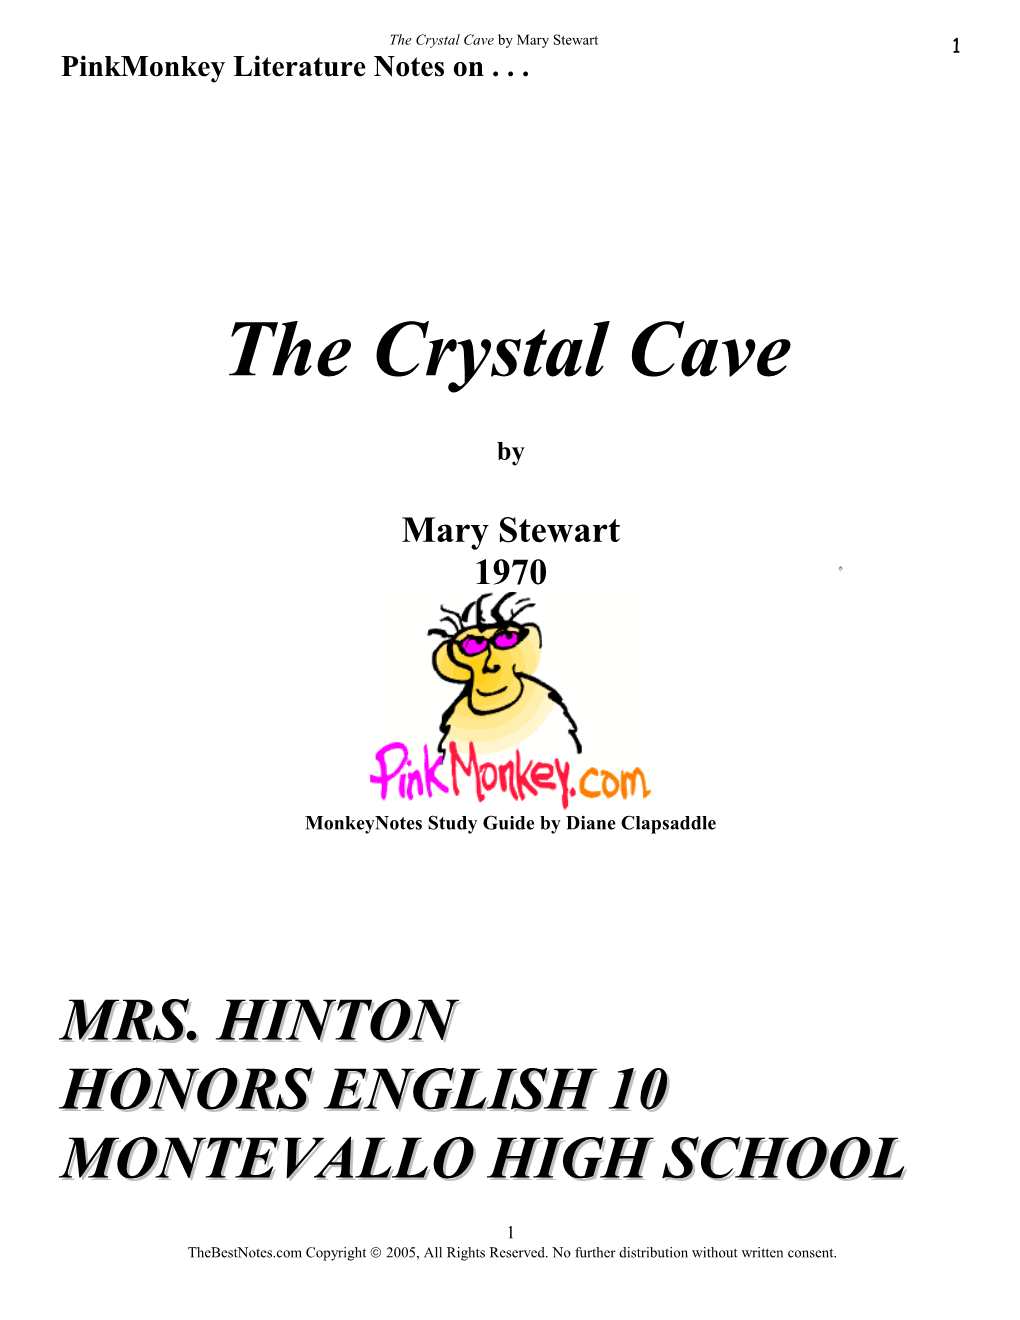 Chapter Summaries the Crystal Cave by Mary Stewart